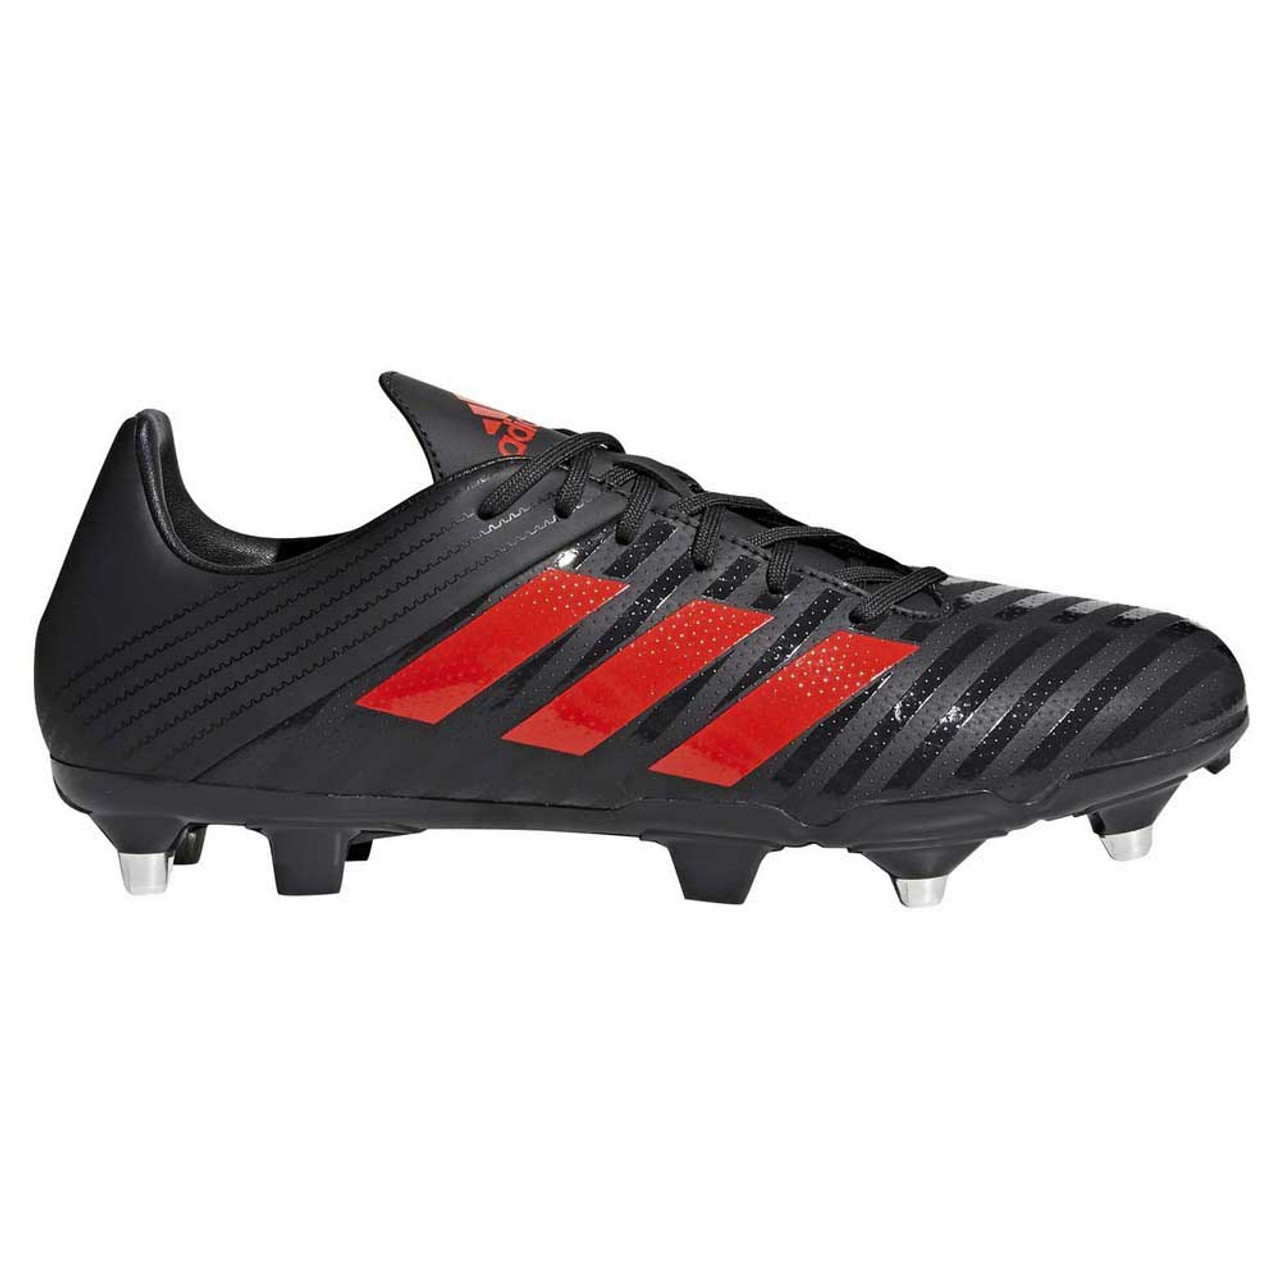 Adidas Malice Control Sg Rugby Boots Black Red On Sale At Rugby